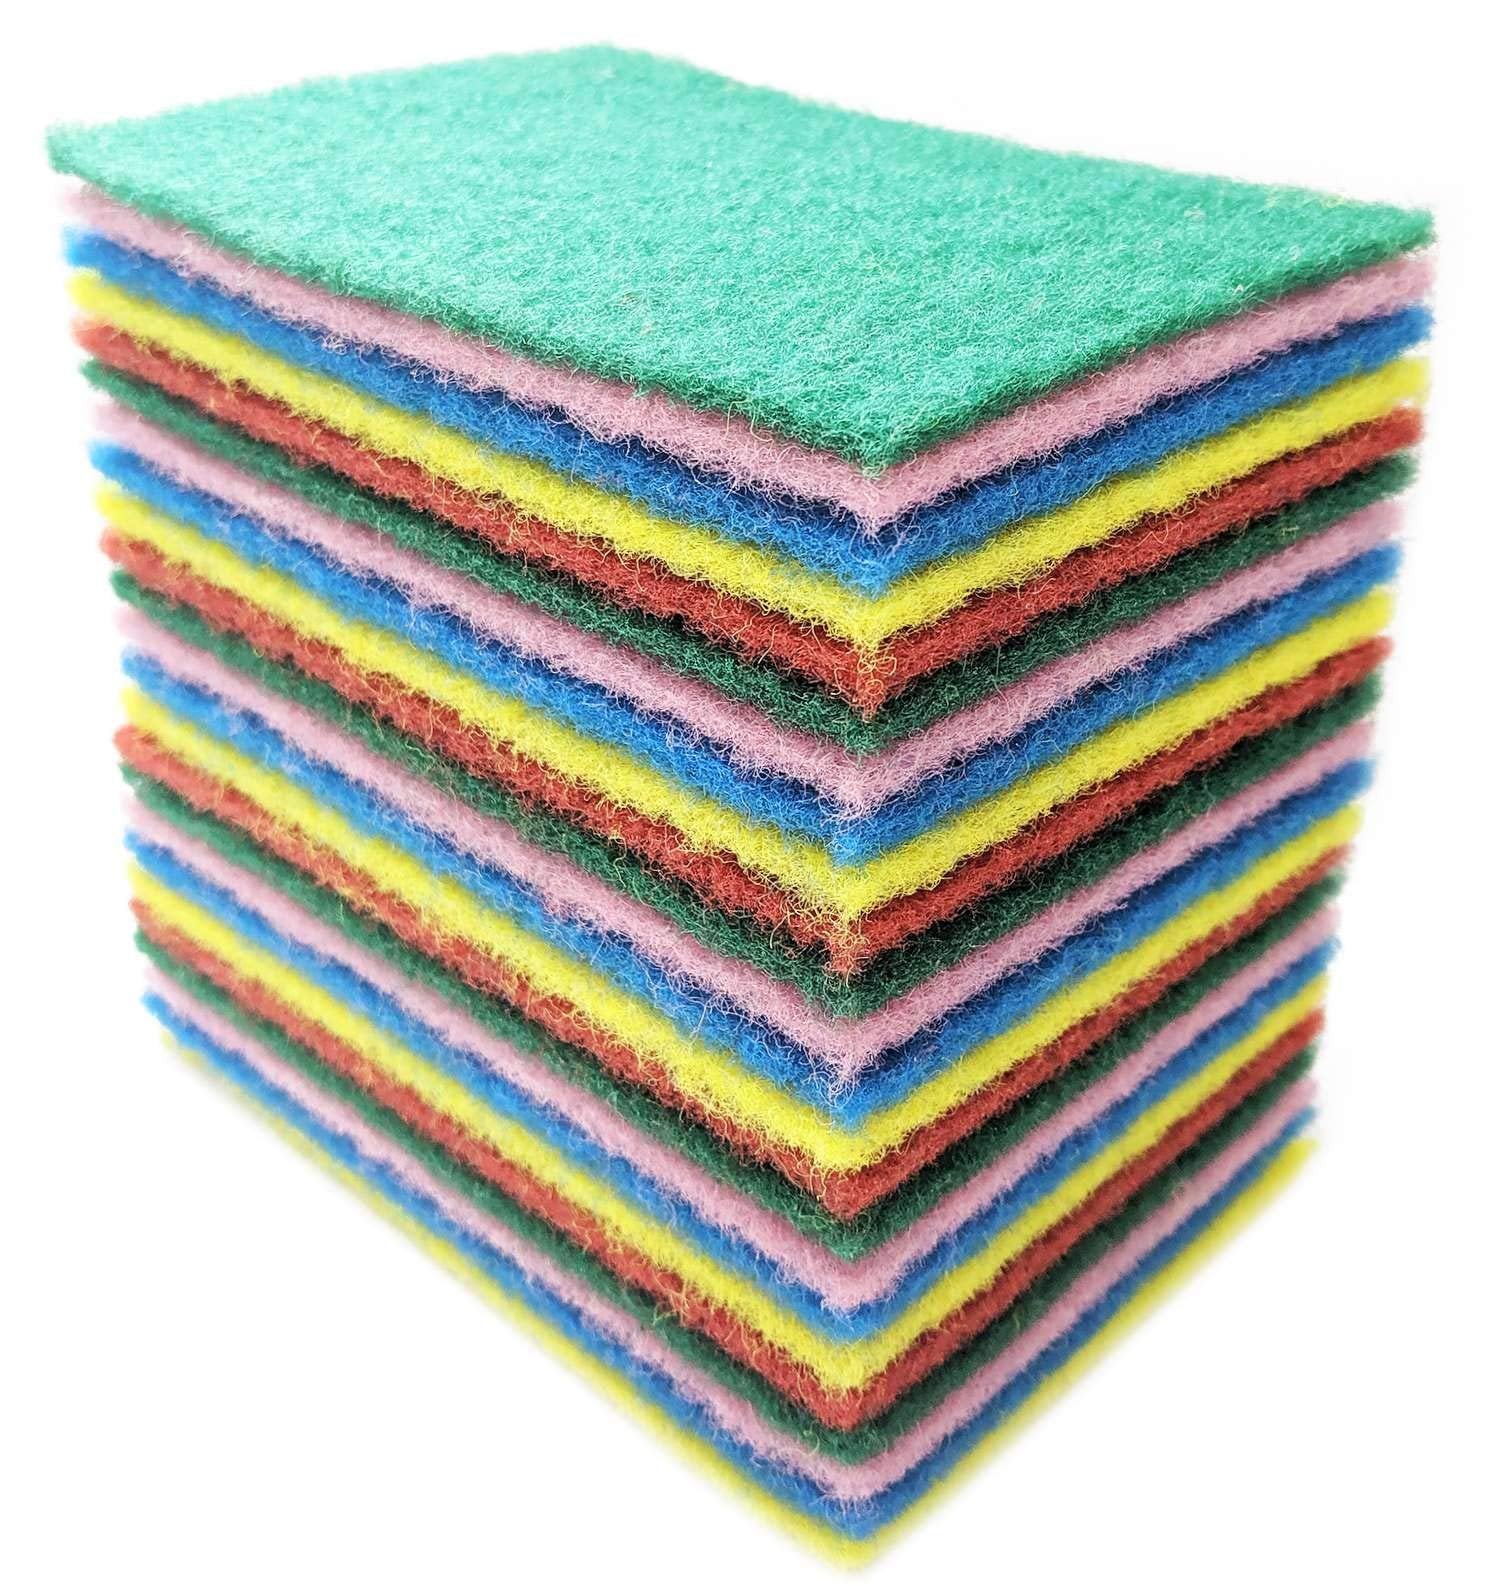 Bundaloo 24 Pack Scouring Pads Scrubbers Set in Red, Yellow, Pink, Green and Blue - Multipurpose, Non Abrasive, Non Scratch - Synthetic Fiber Cleaning and Scouring Scrubs - 6x4 Inches…